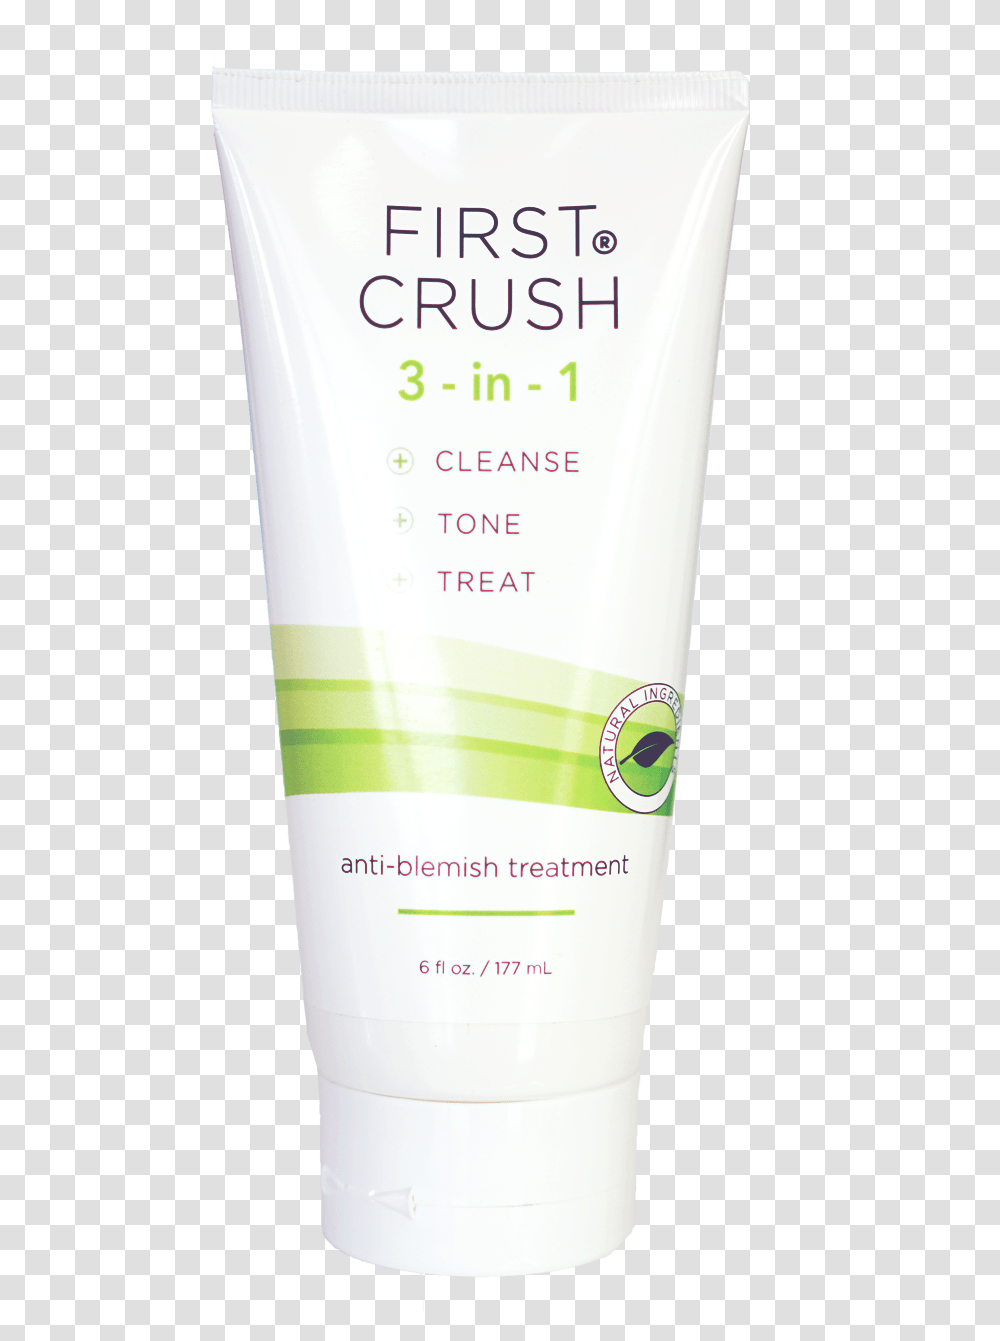 First Crush 3 In 1 Anti Blemish Treatment From Merlot, Bottle, Sunscreen, Cosmetics, Lotion Transparent Png